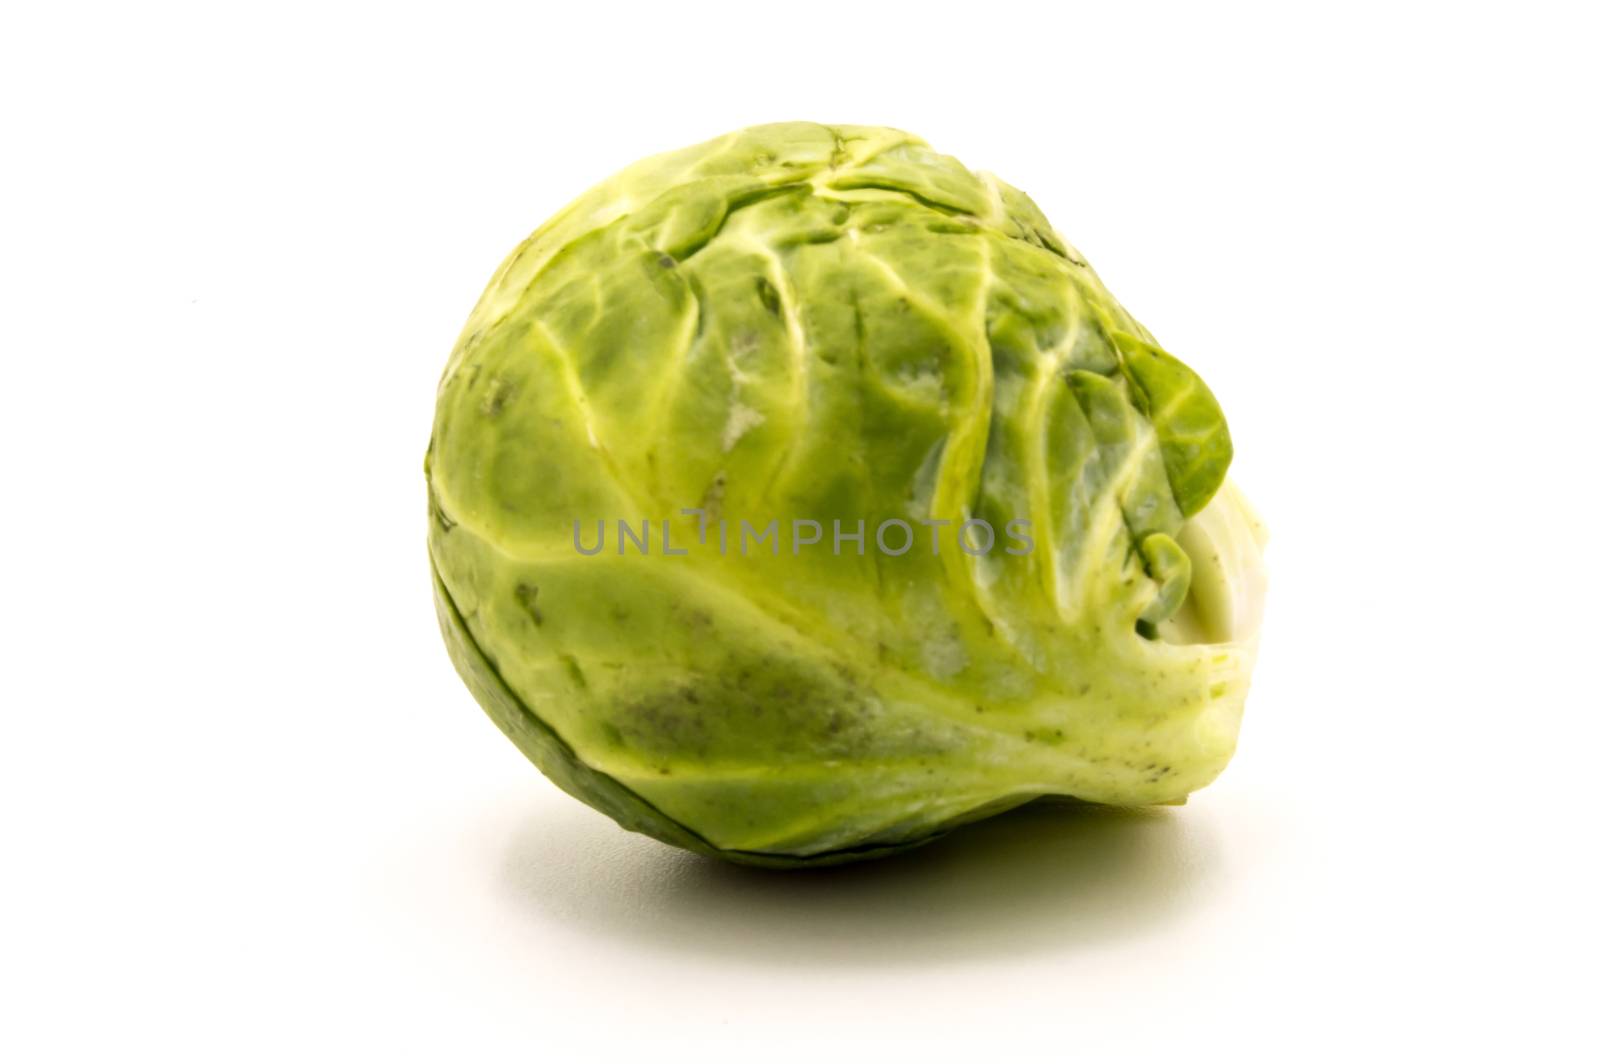 One of Brussels sprouts on white background